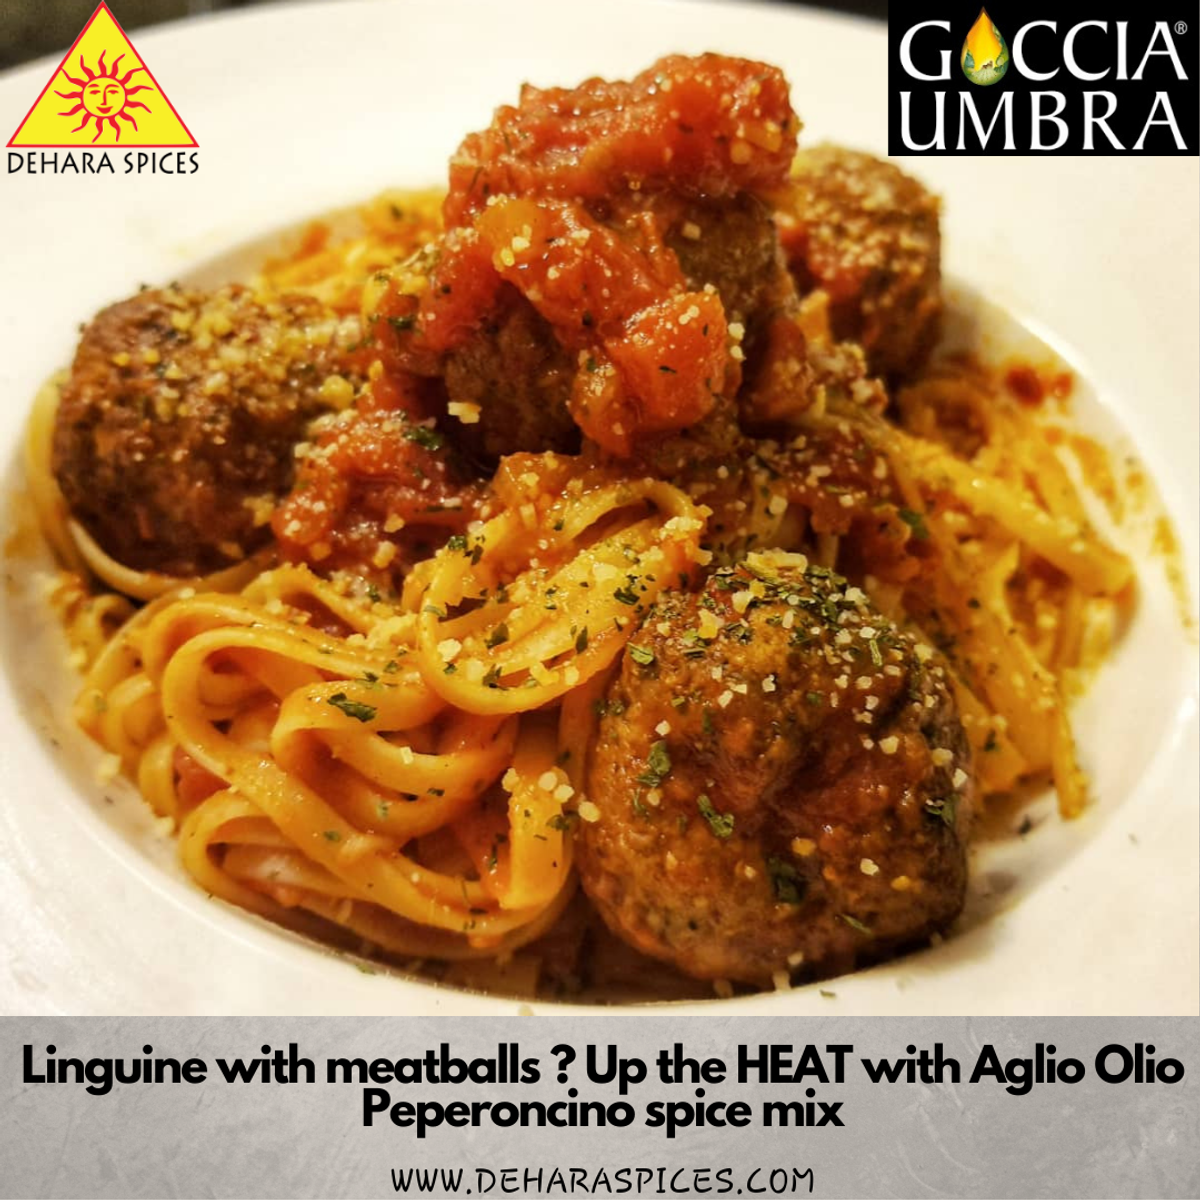 Linguine with meatballs in a spicy tomato sauce with Aglio Olio Spice Mix (serves 4)